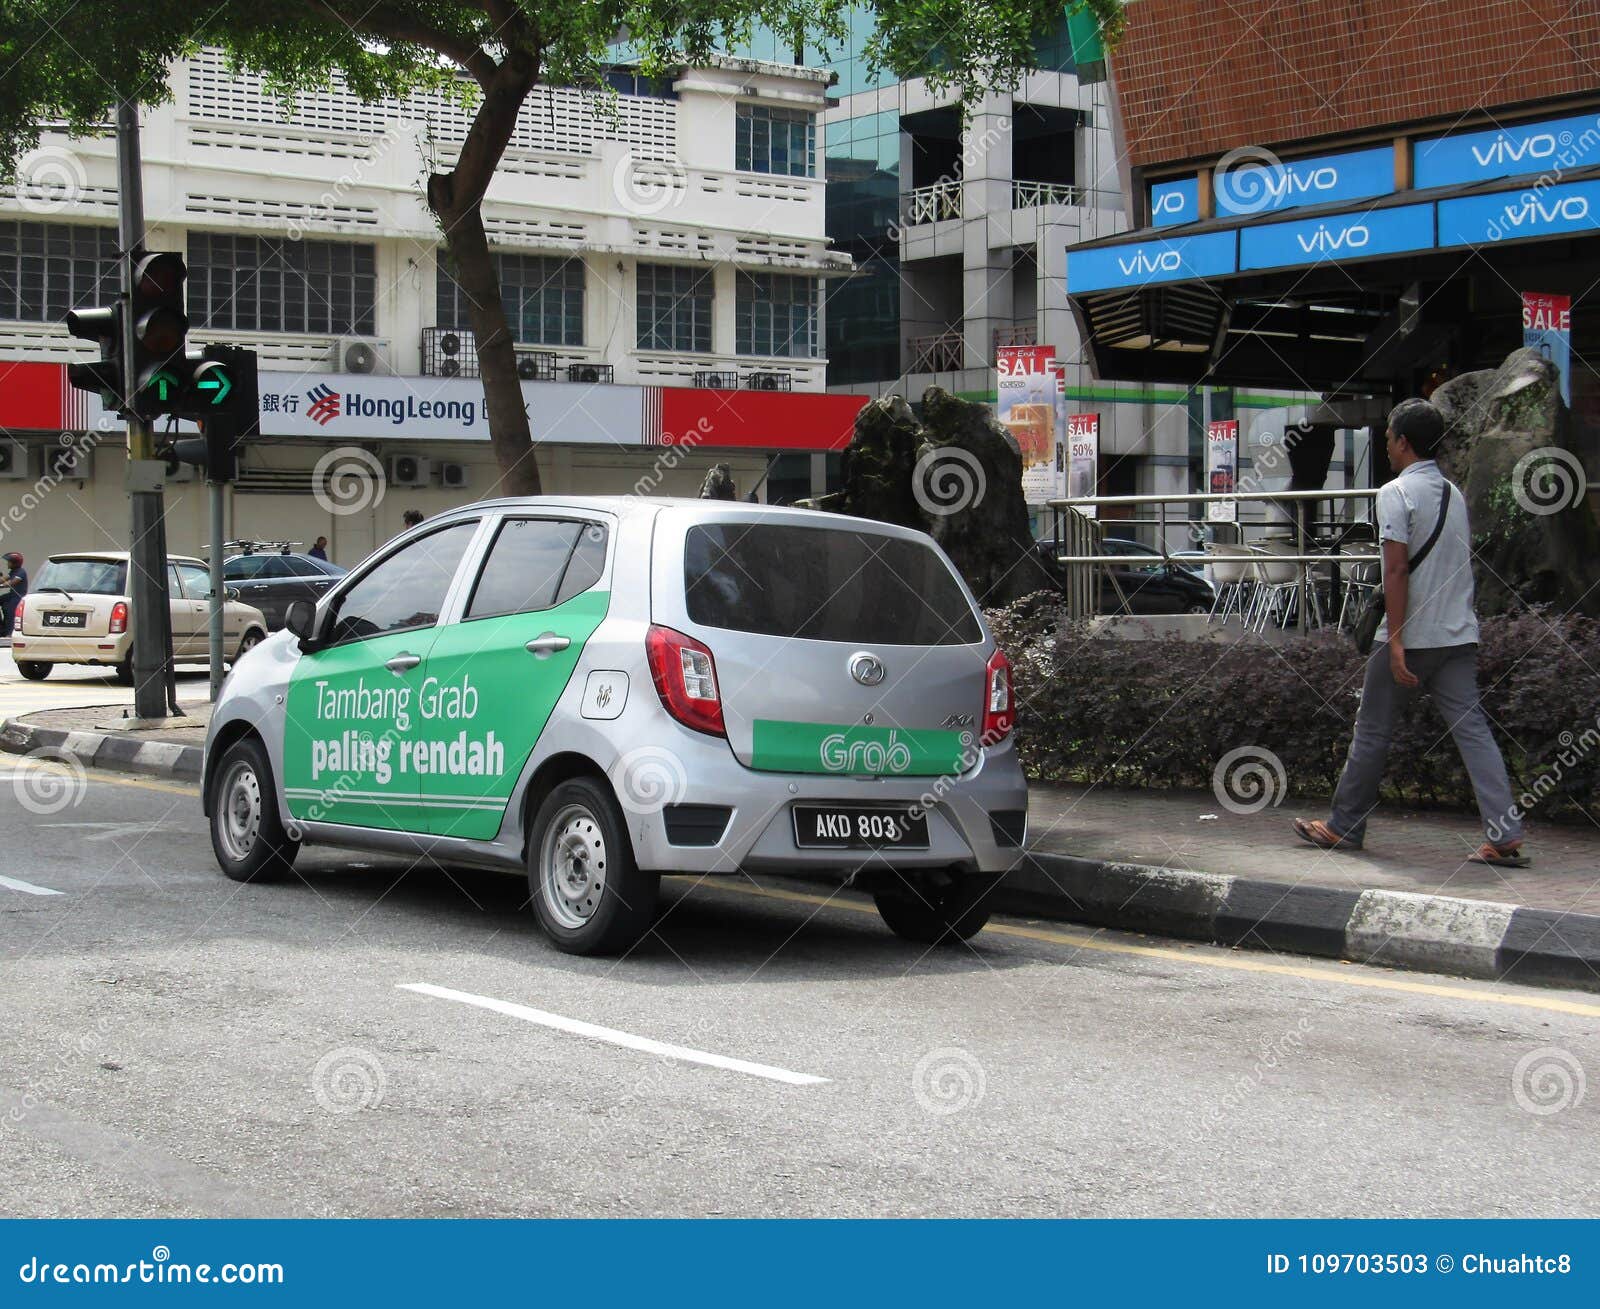 Grab Vehicle With Promotional Ads Painted Around Its Side 